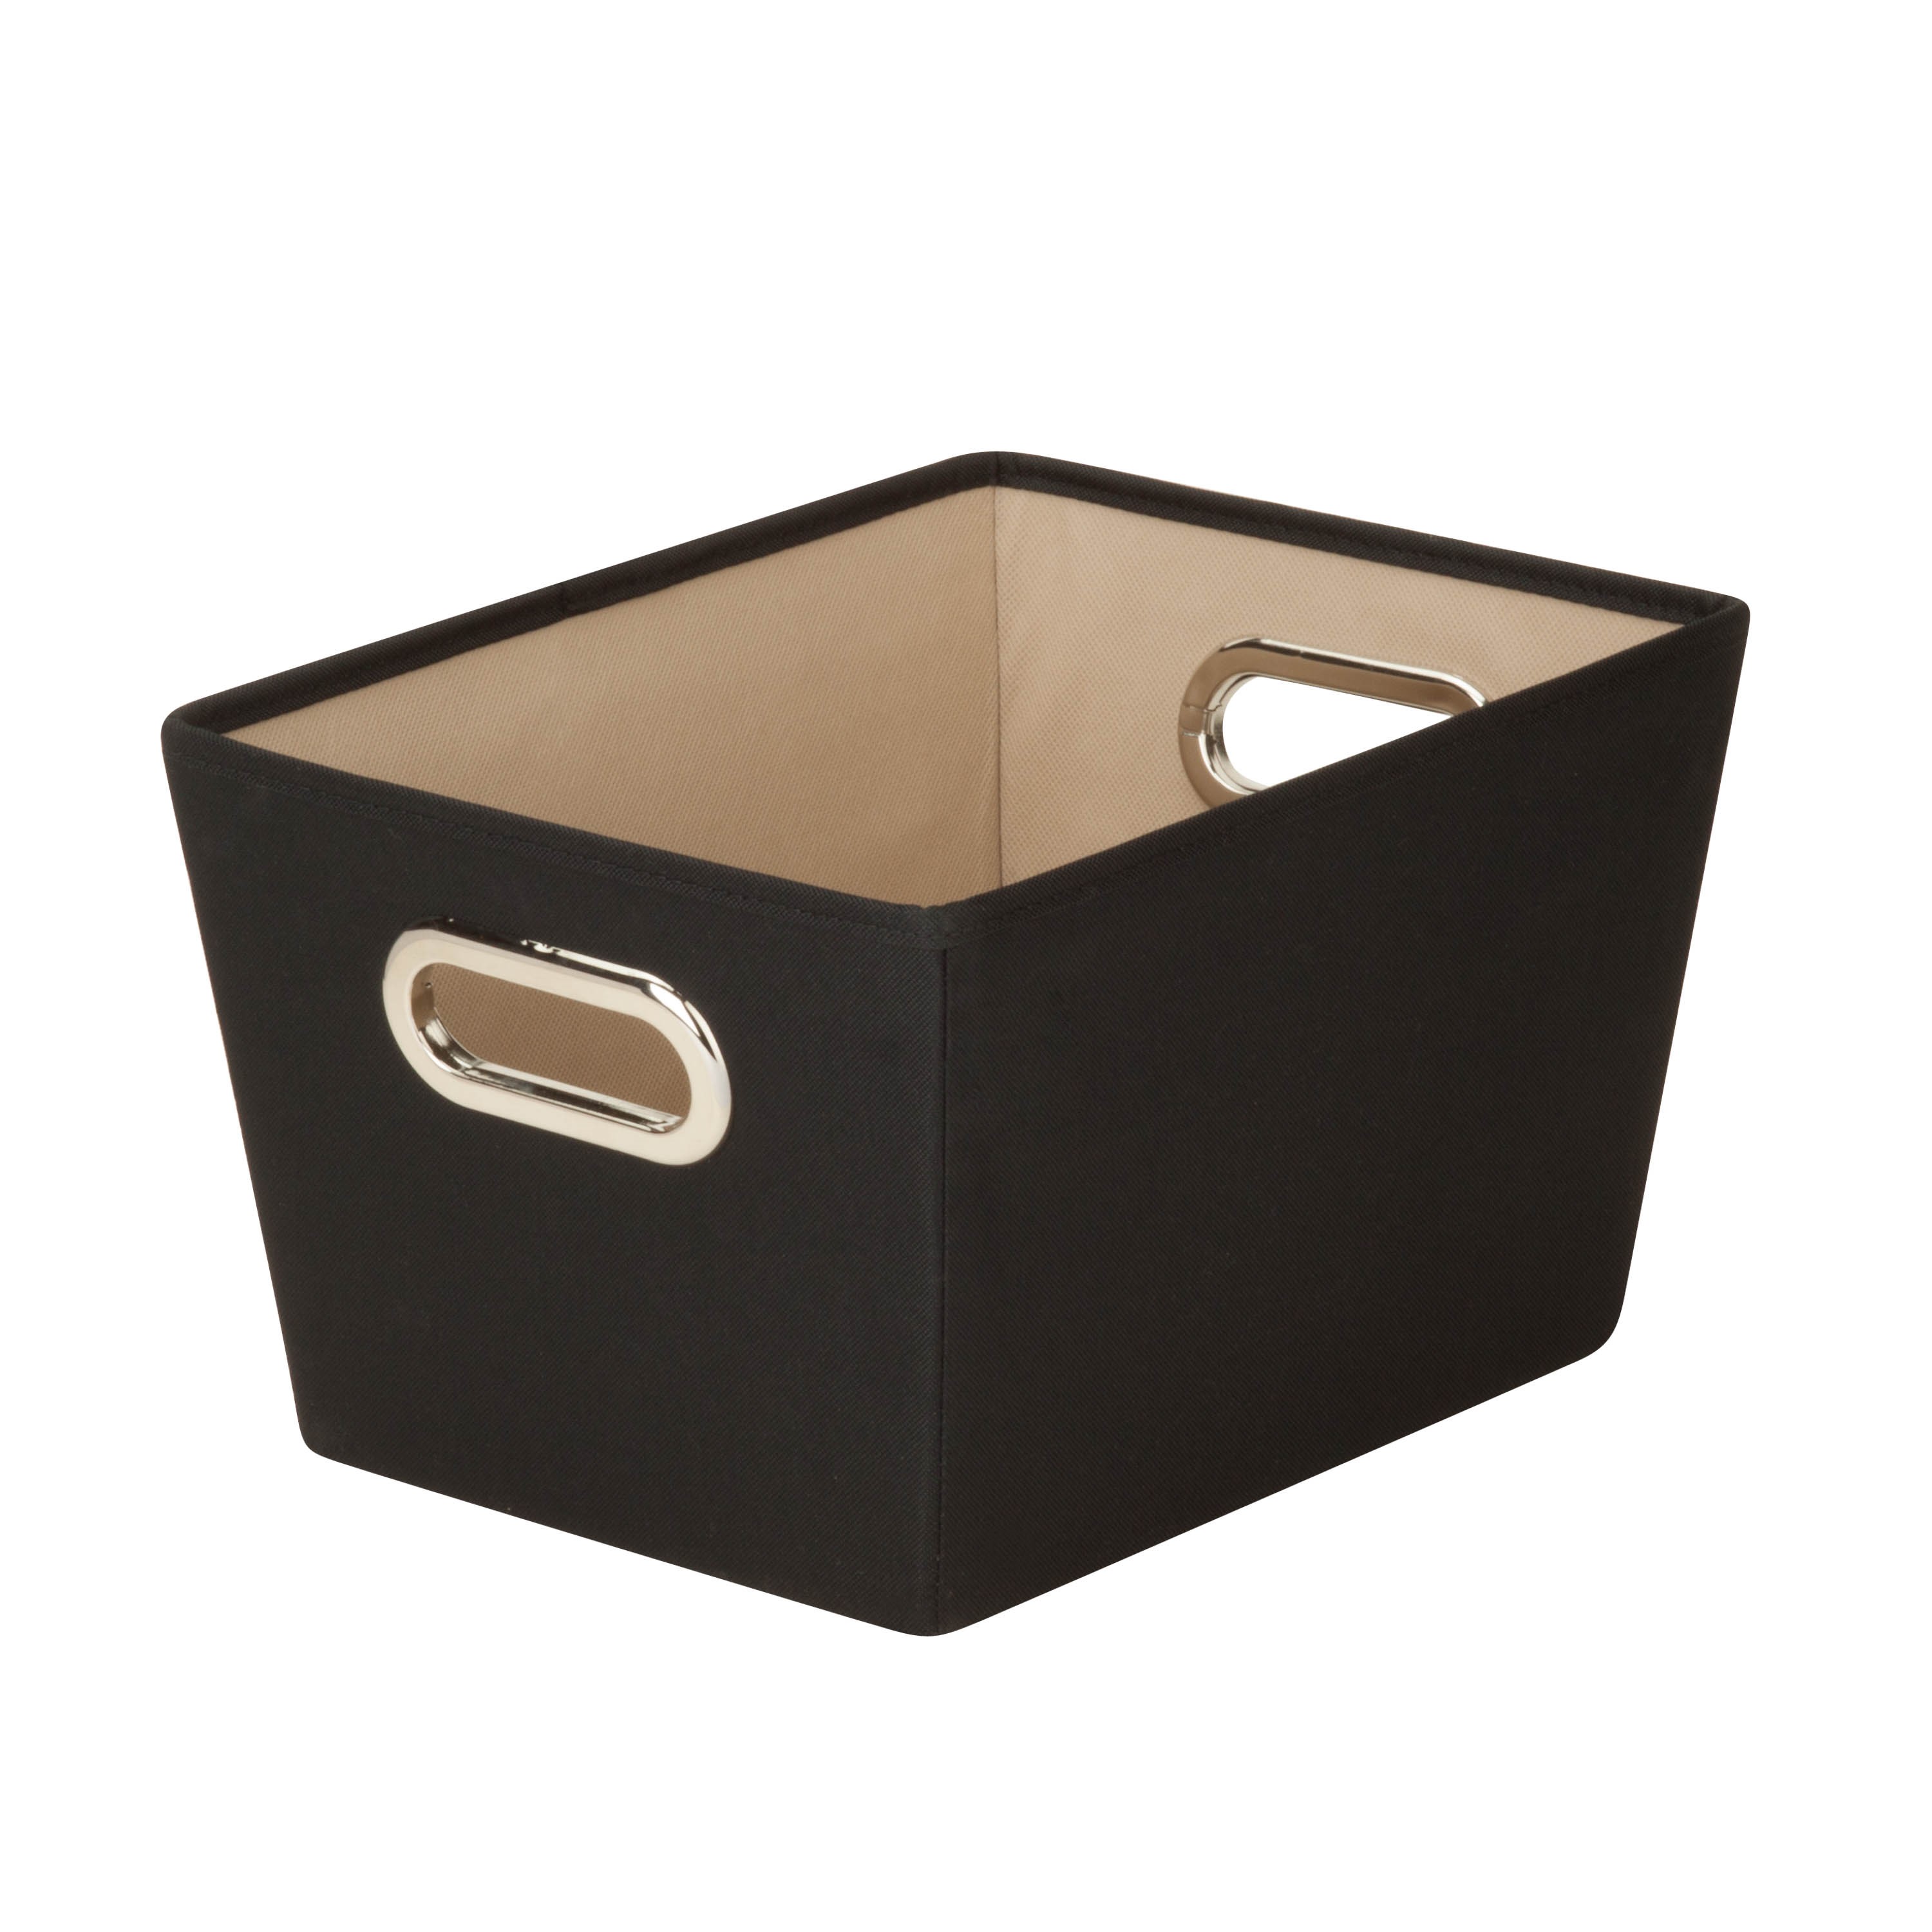 Honey-Can-Do Polyester Storage Bin with Handles, Black - image 2 of 3